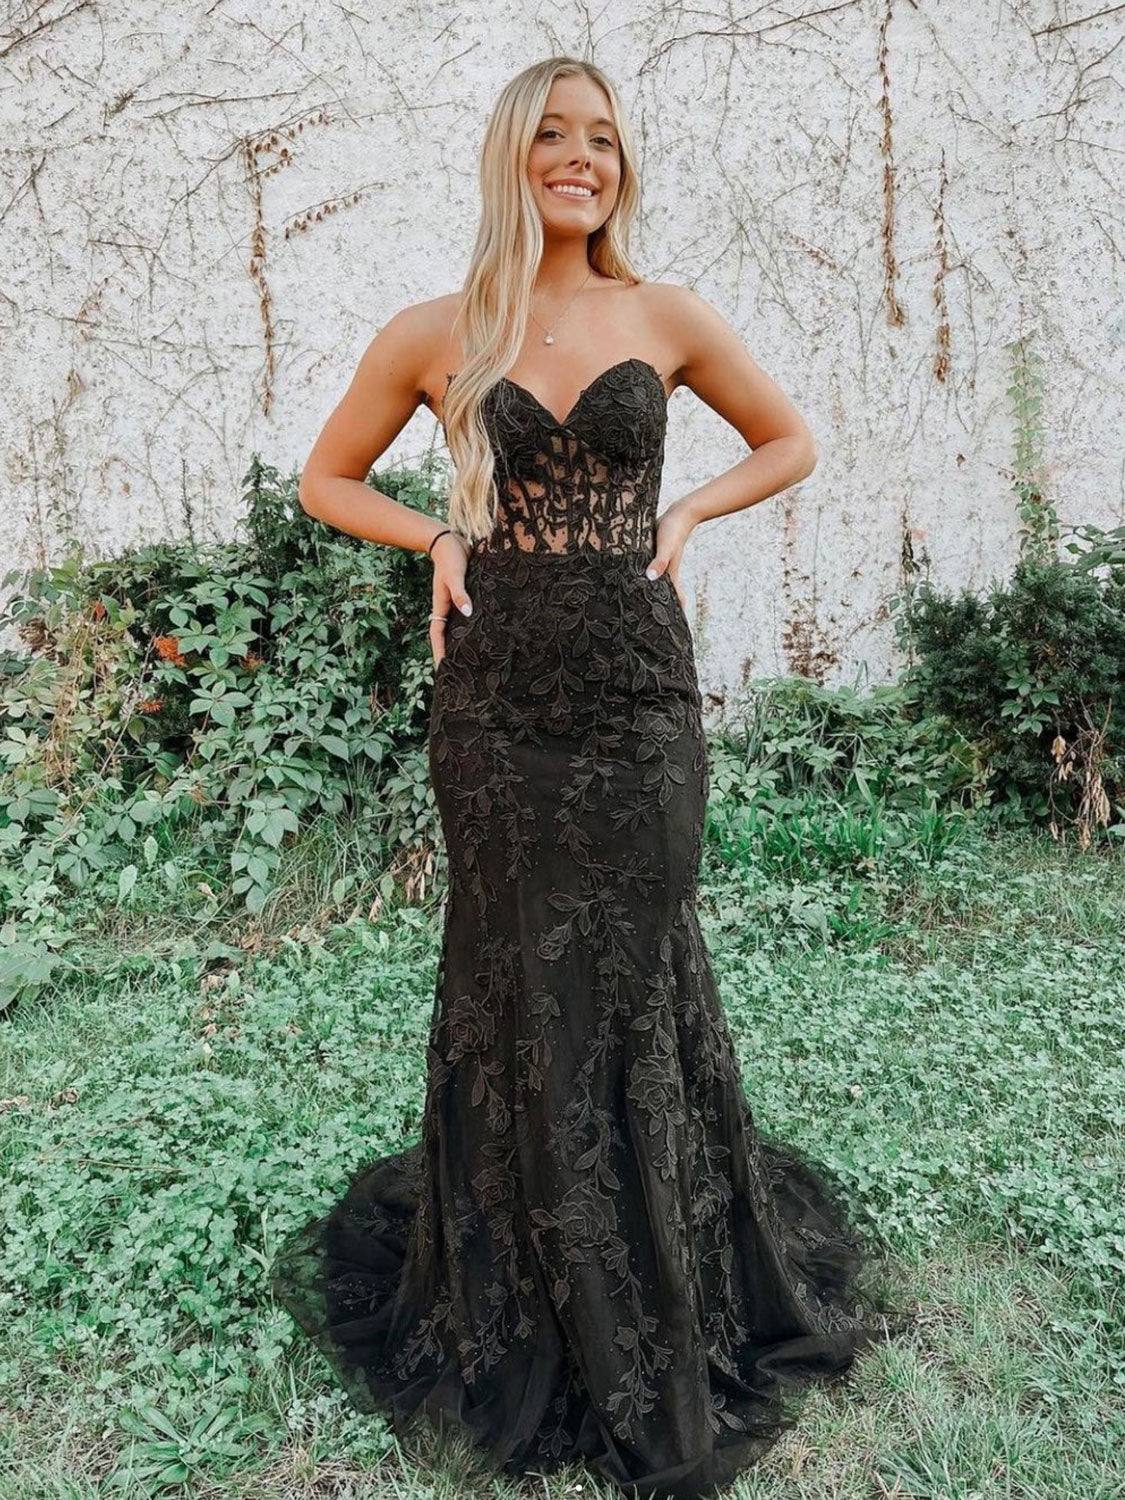 Black tulle lace mermaid long prom dress, black tulle lace evening dress - RongMoon